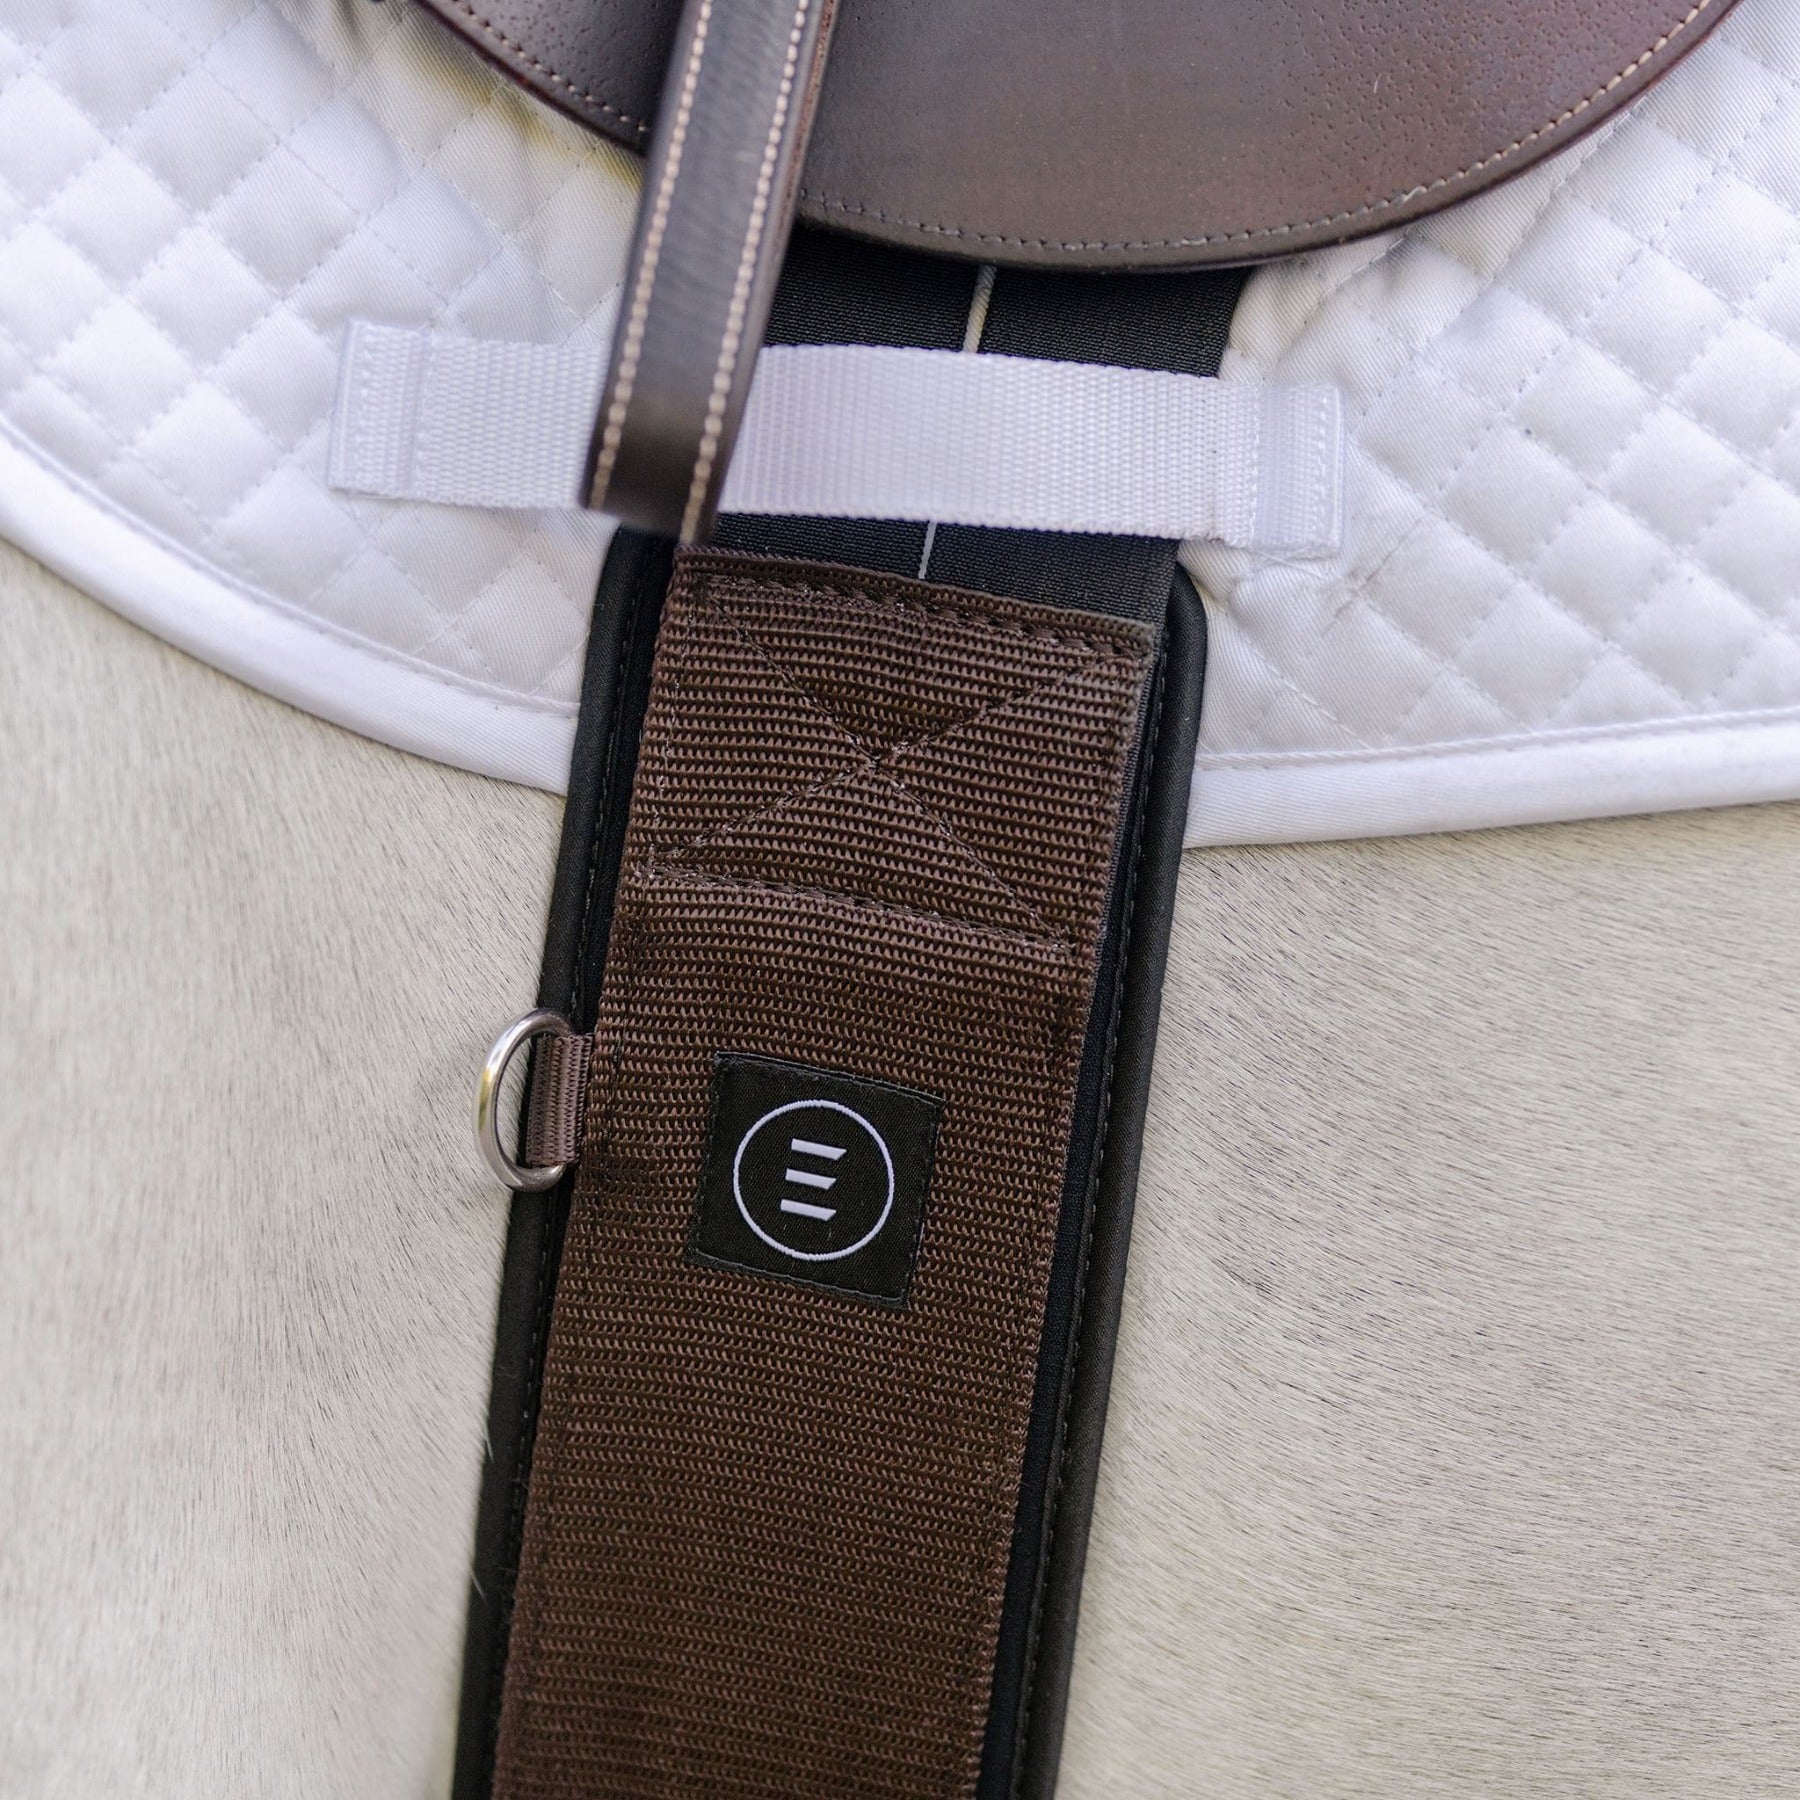 Equifit Essential Schooling Girth, Brown